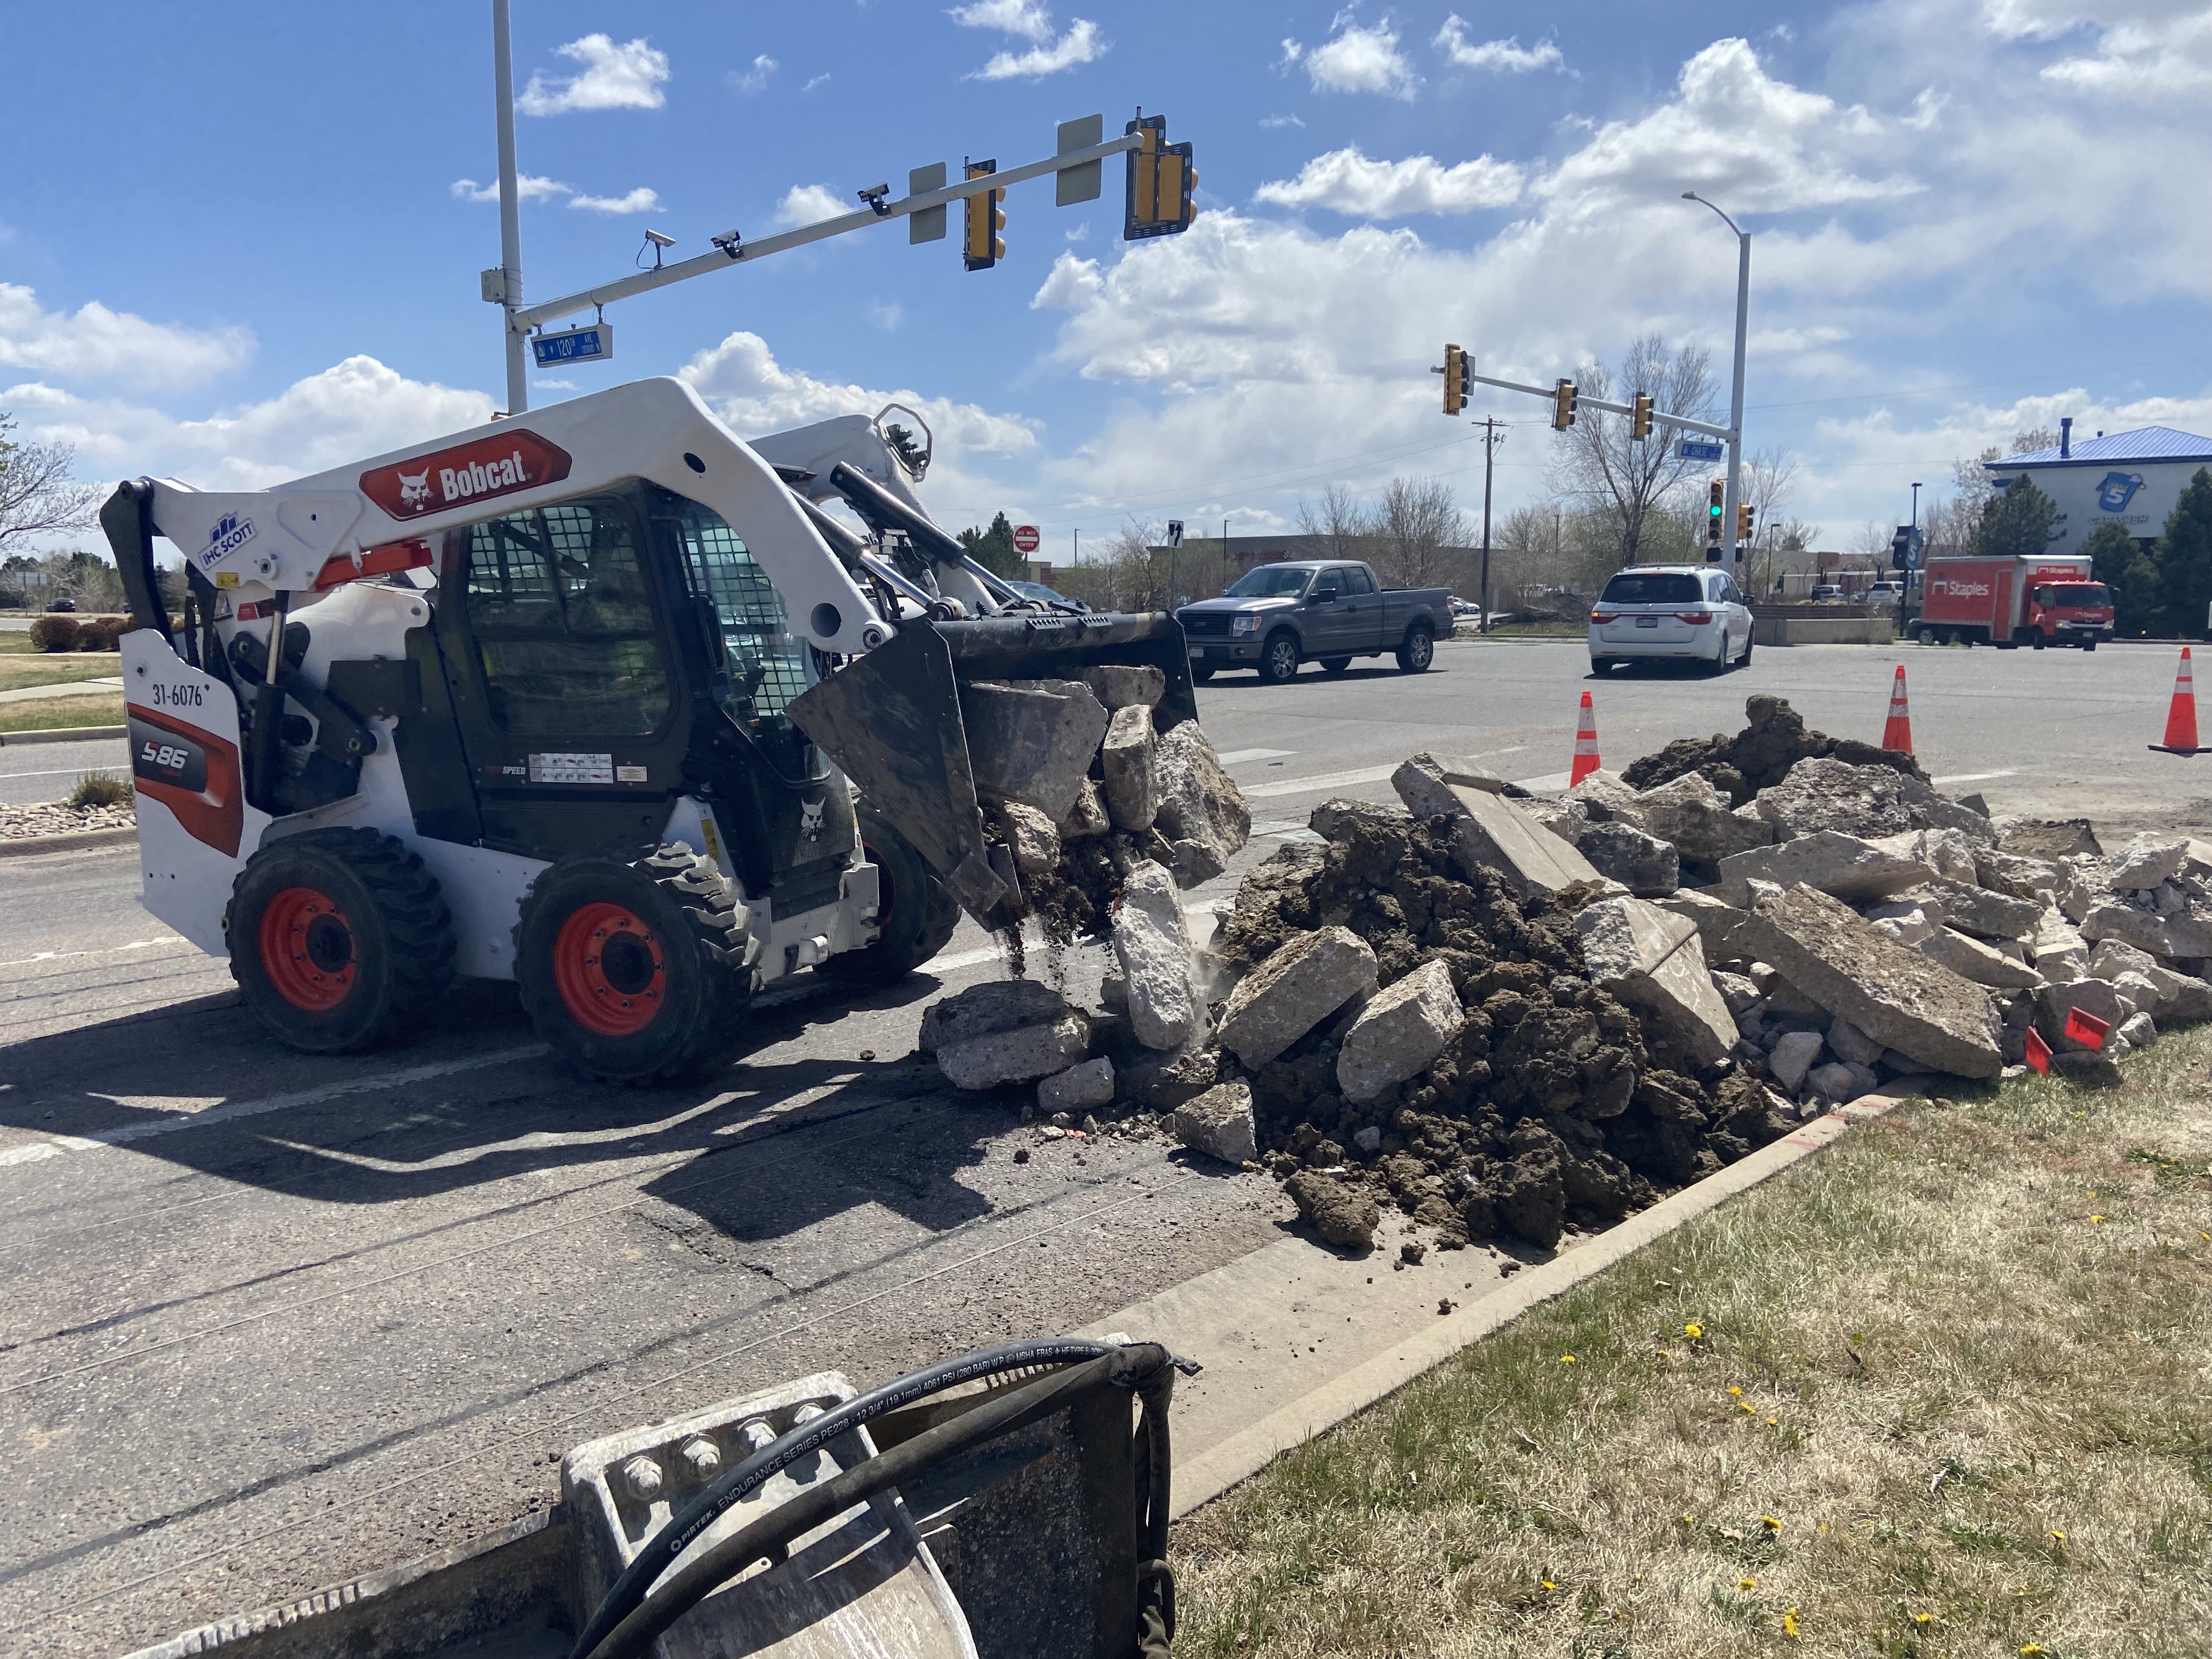 US 285_120th & Chase_removal of concrete.jpg detail image